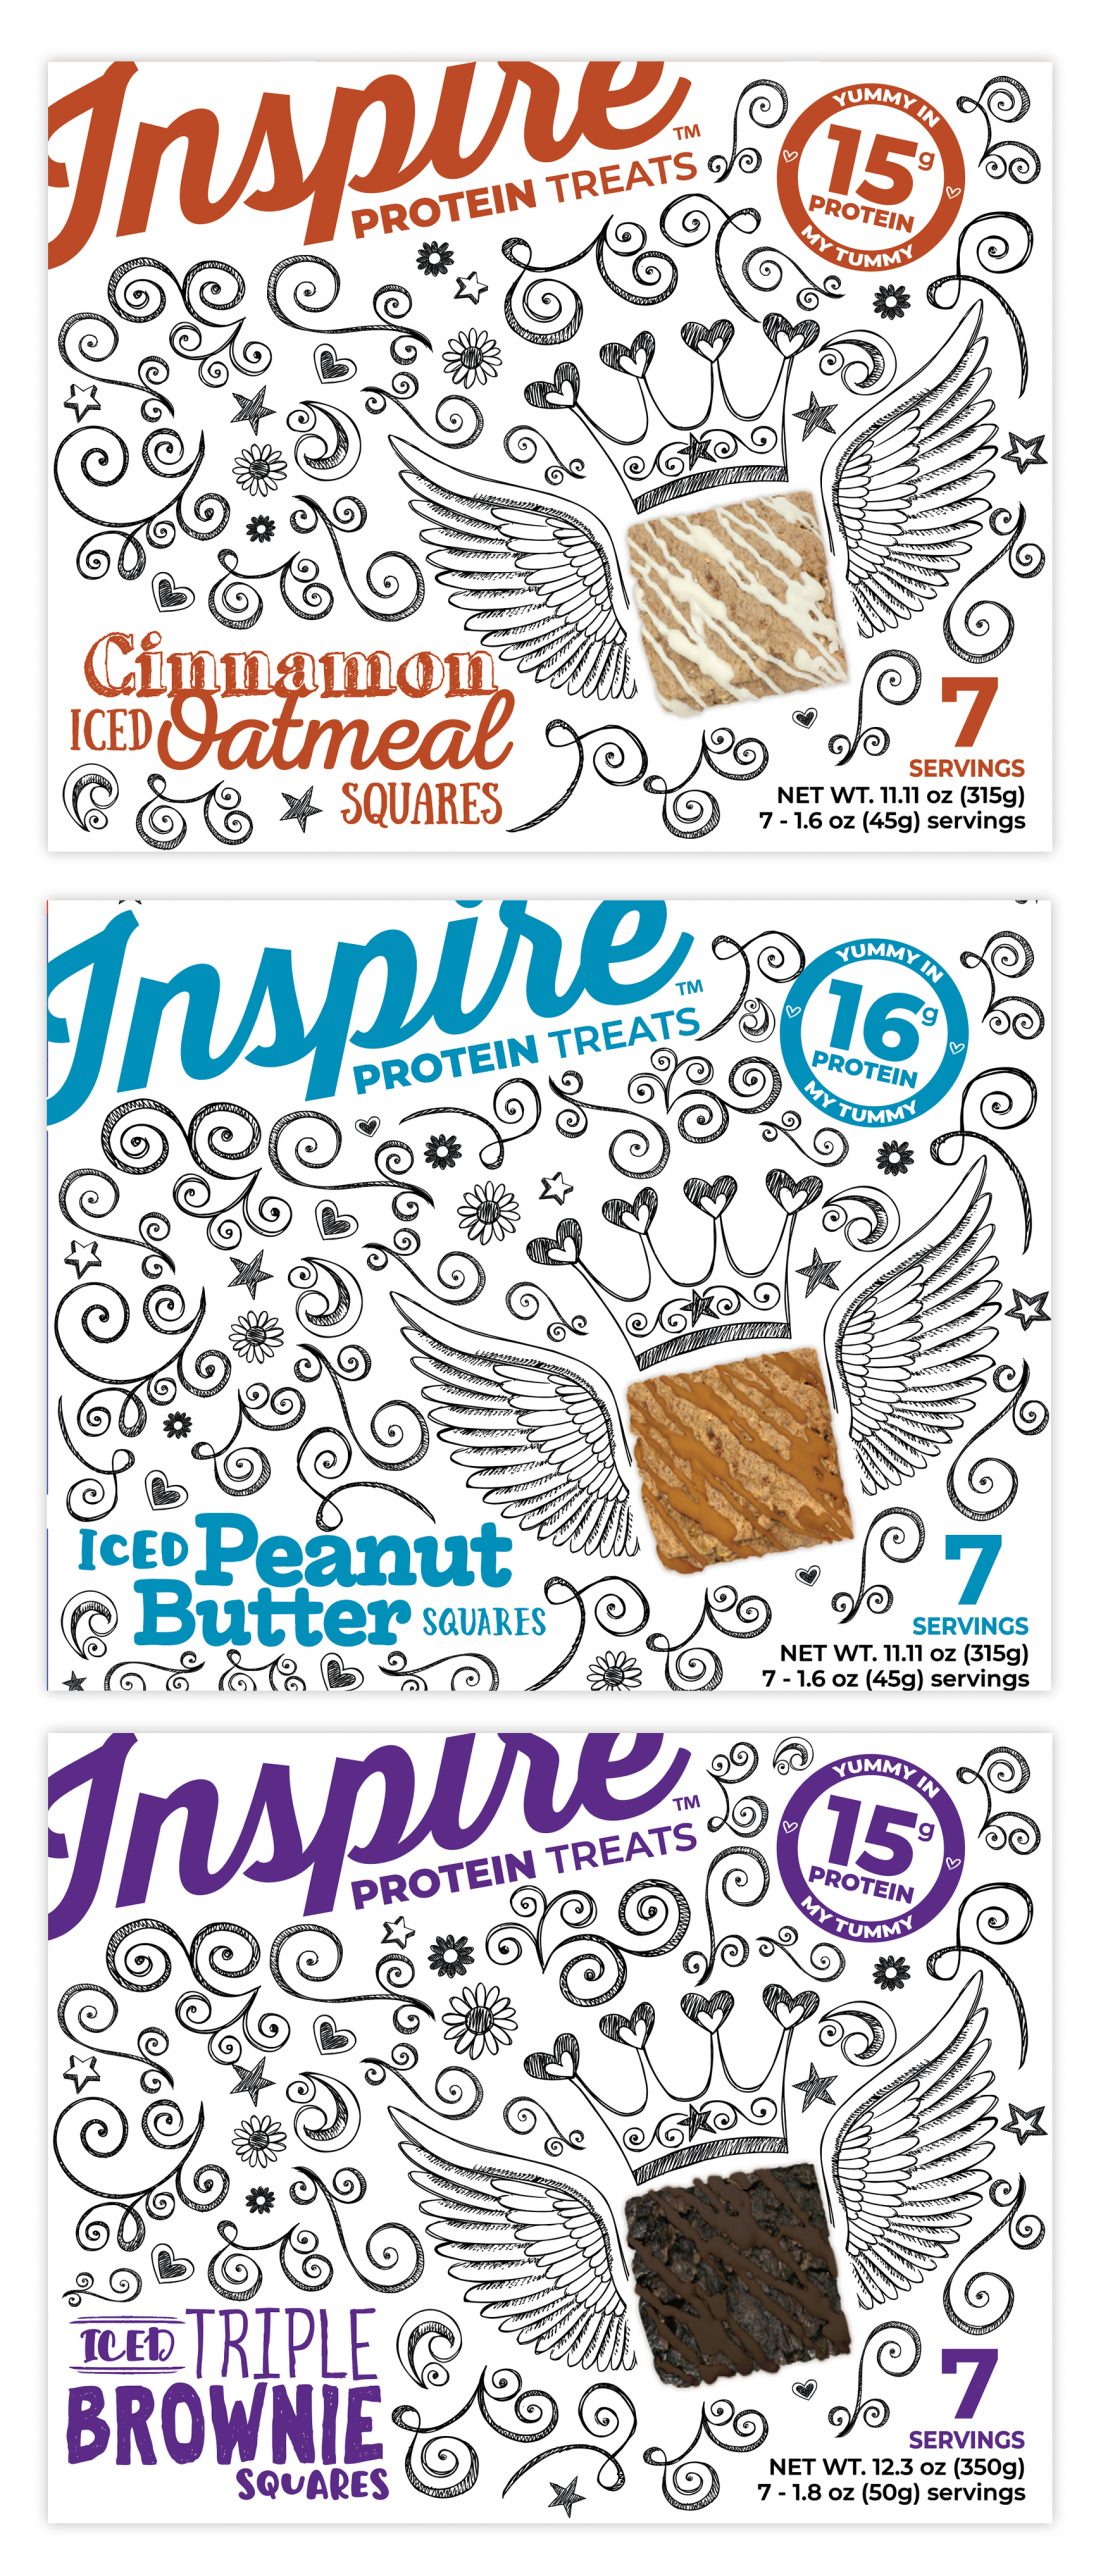 Bariatric Eating Inspire Protein Treats Package Design by Octane Advertising Design